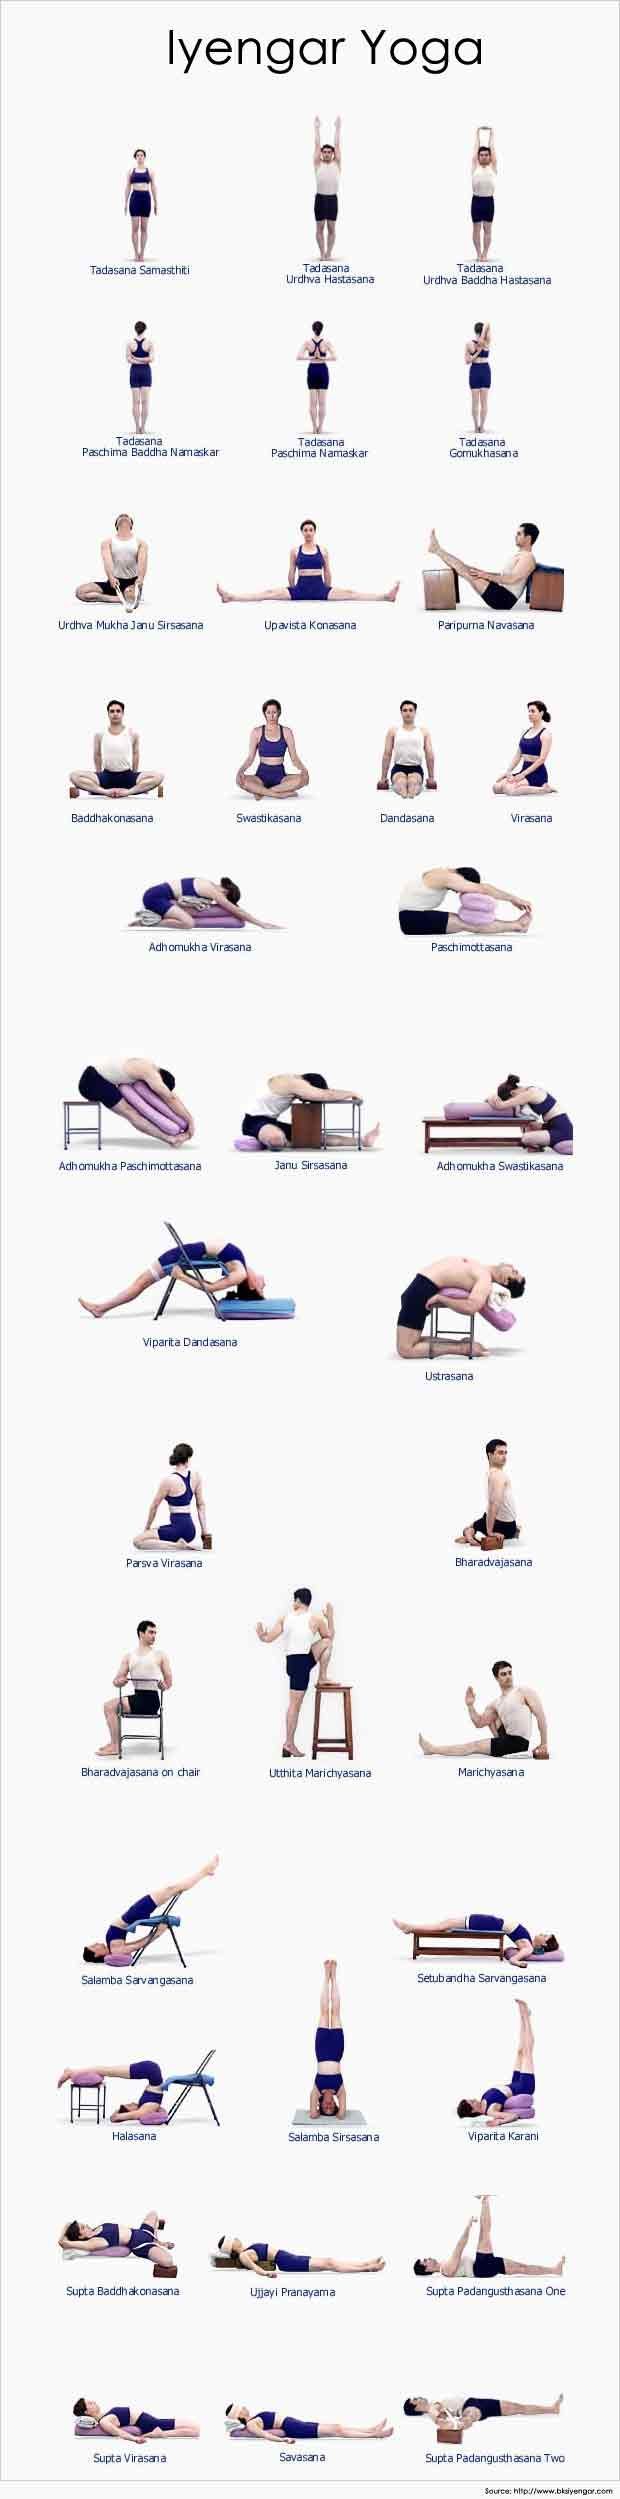 Iyengar yoga poses consist of many traditional yoga postures and about 14 variations of pranayama. The yoga poses evolve into more